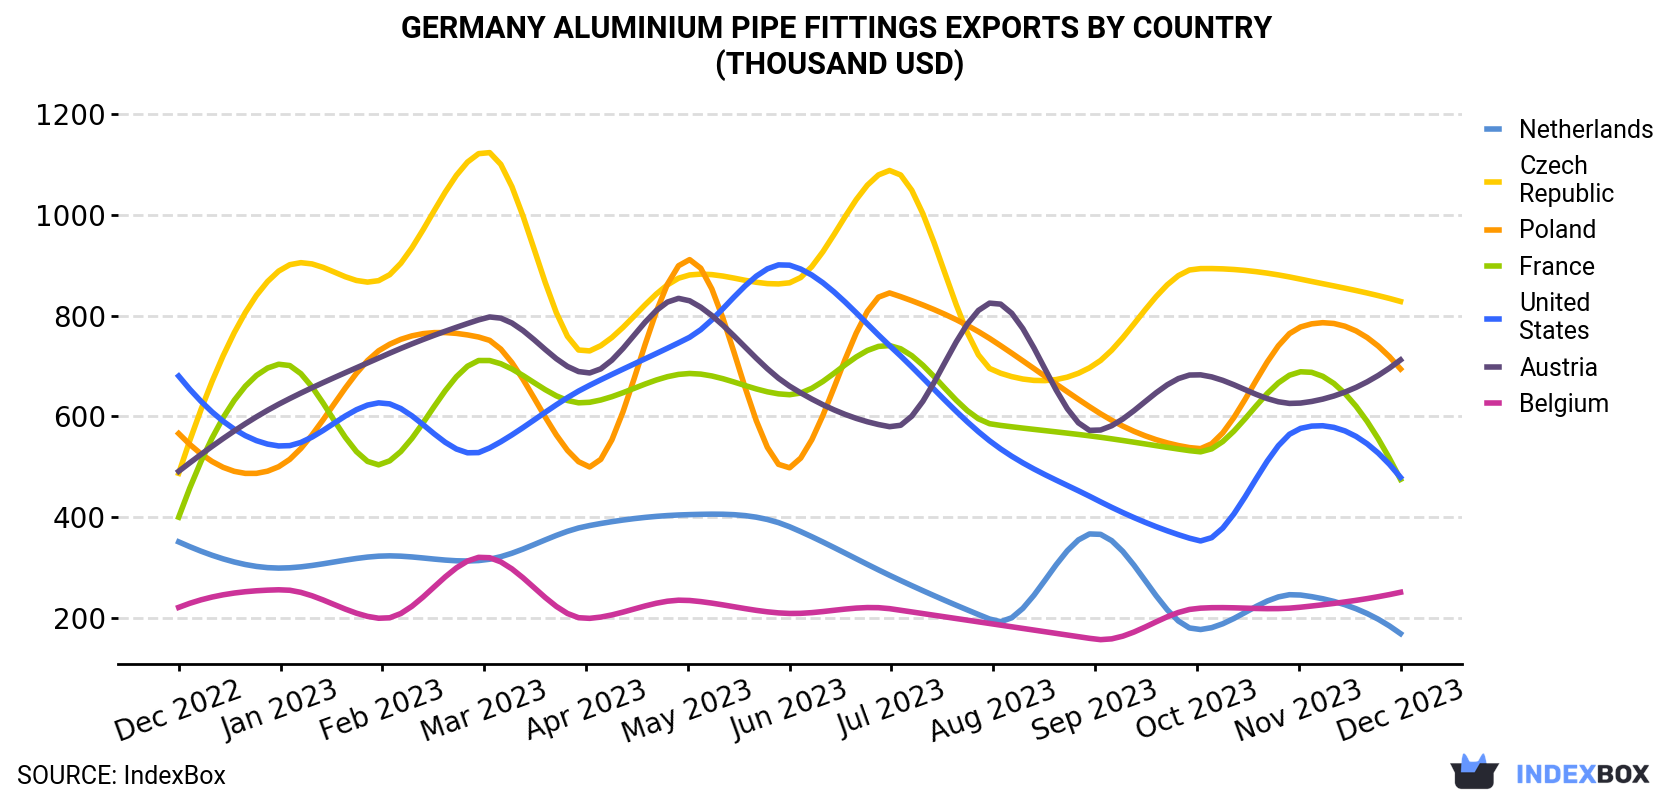 Germany Aluminium Pipe Fittings Exports By Country (Thousand USD)